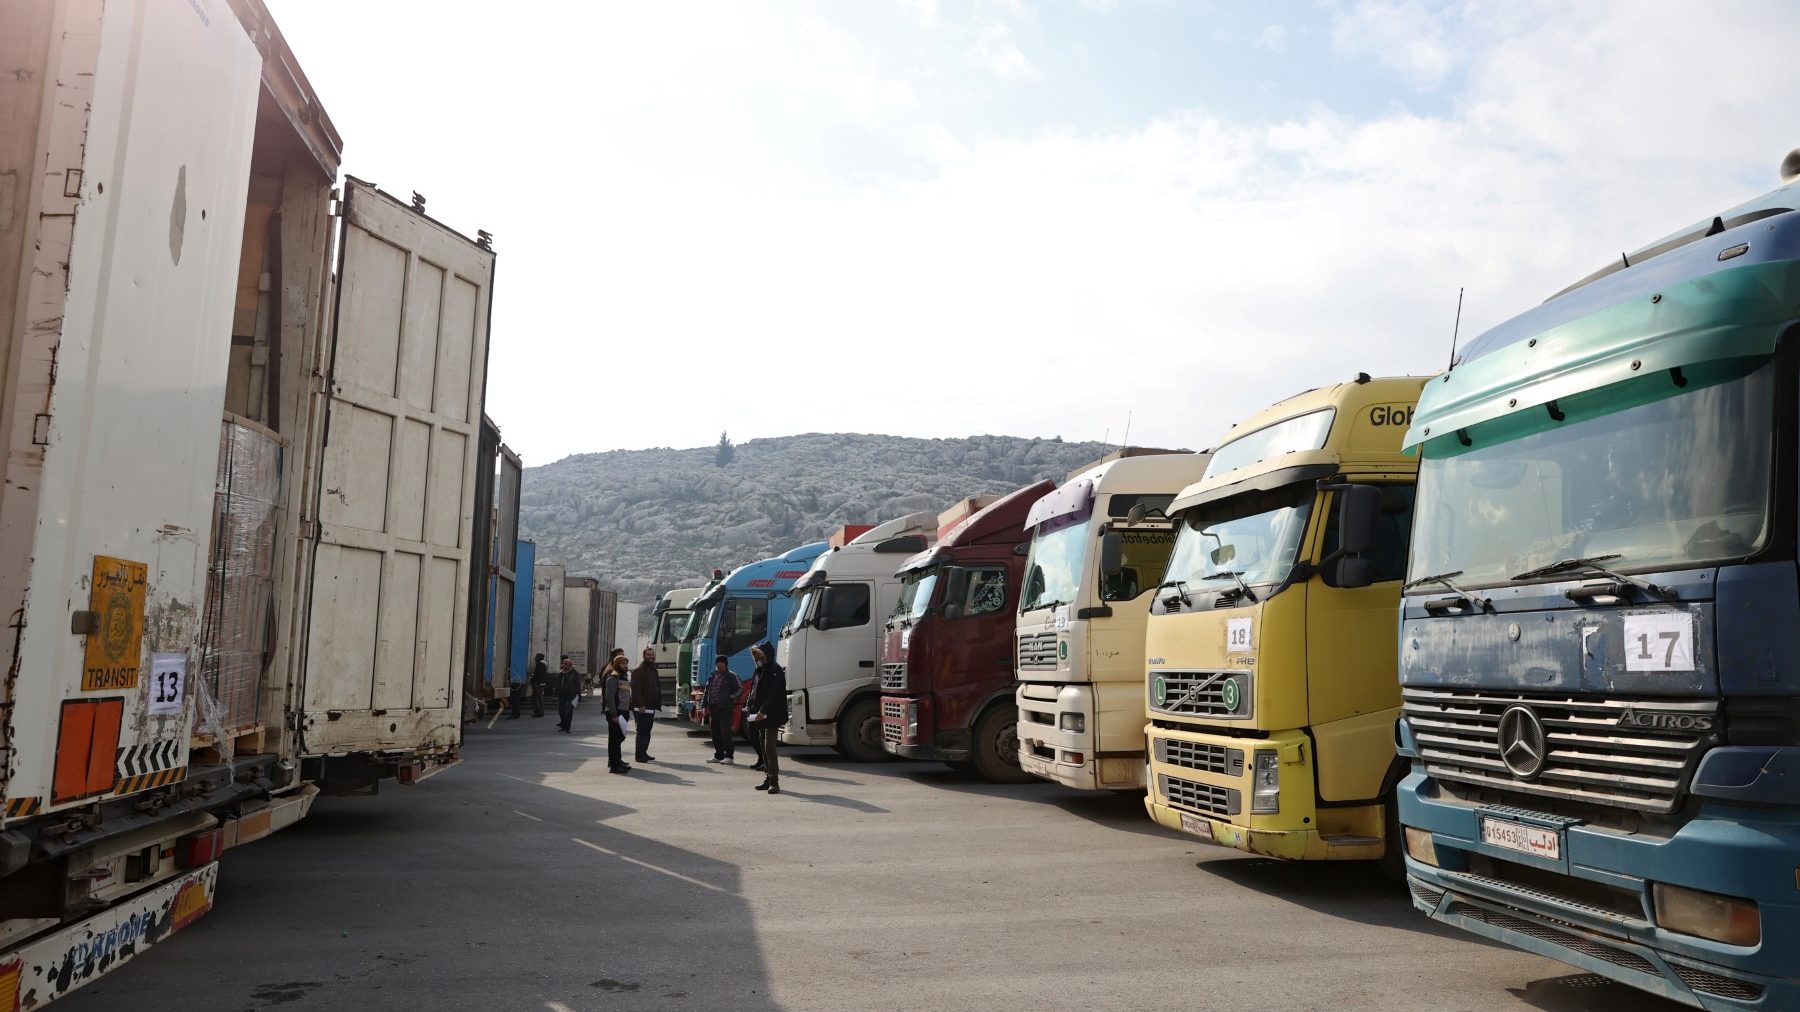 Regime Manipulating Aid in Syria, Withholding it from Opponents